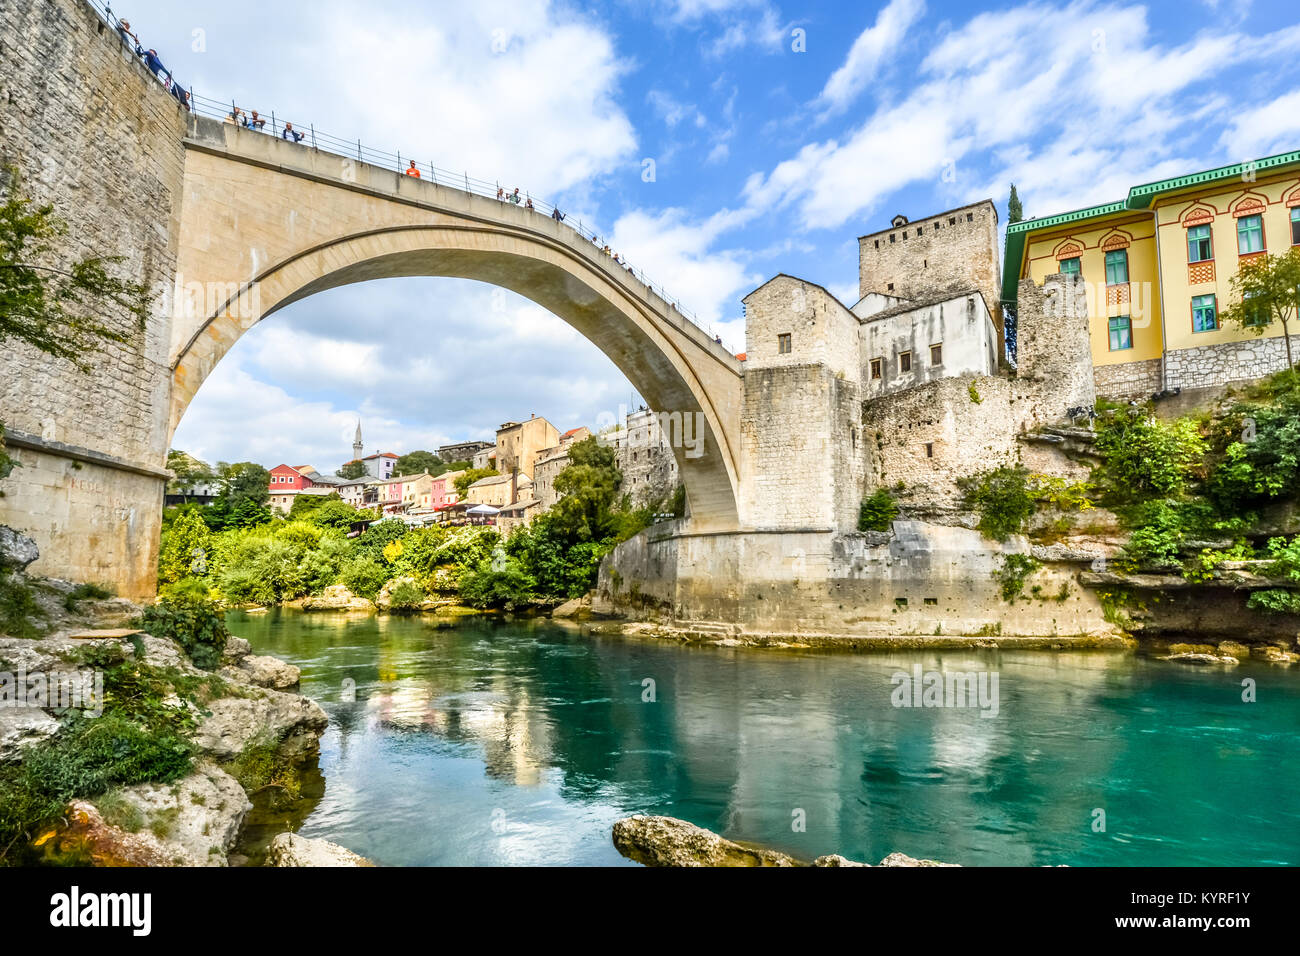 The Stari Most, old Ottoman bridge in the city of Mostar in Bosnia and Herzegovina that crosses the river Neretva Stock Photo